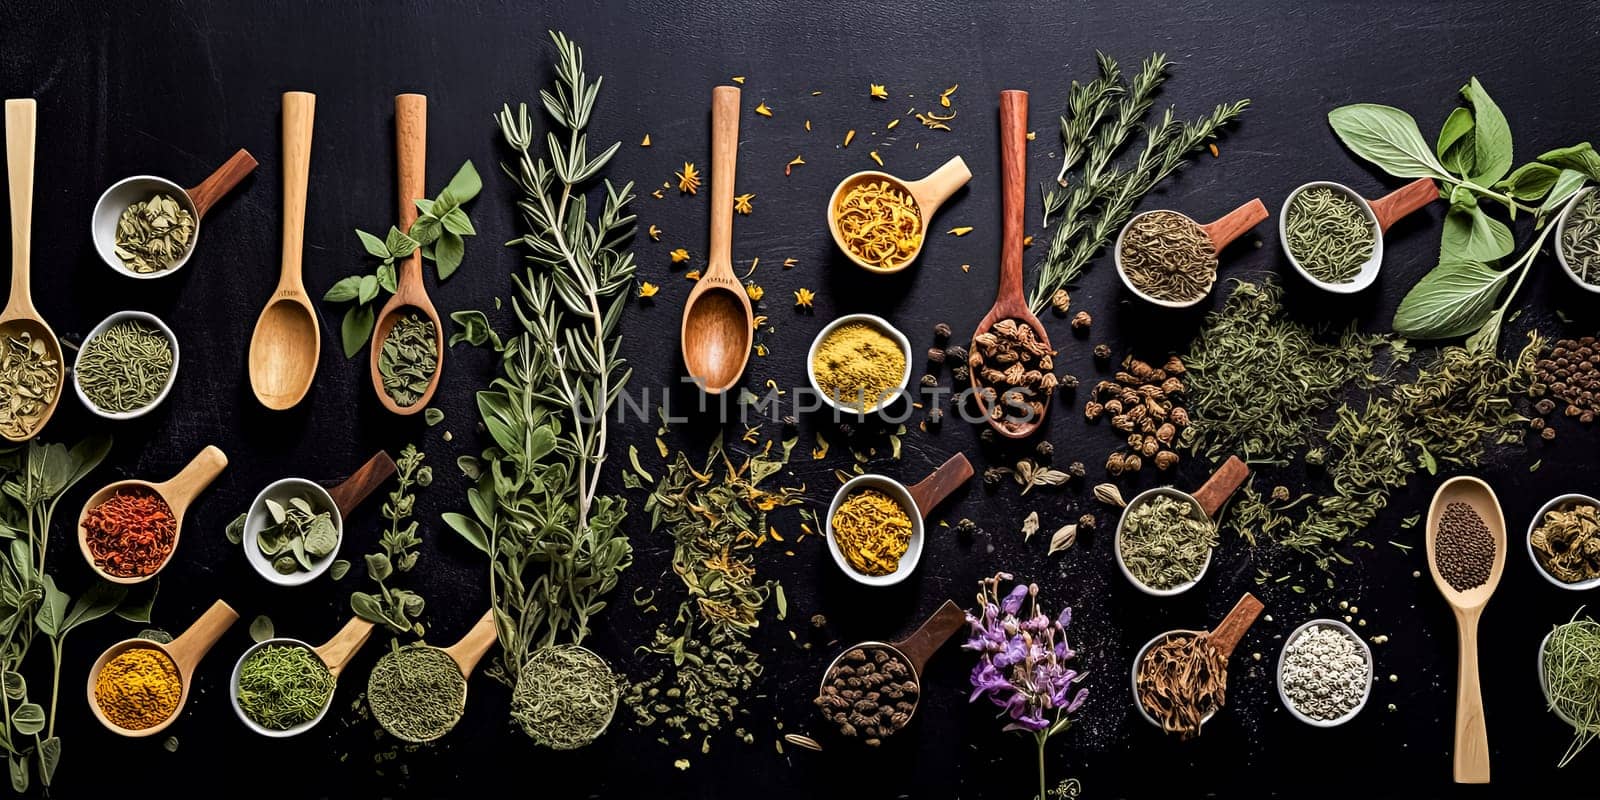 A wooden table with a variety of spices and herbs in small bowls. The spices are arranged in a way that they are easy to access and use